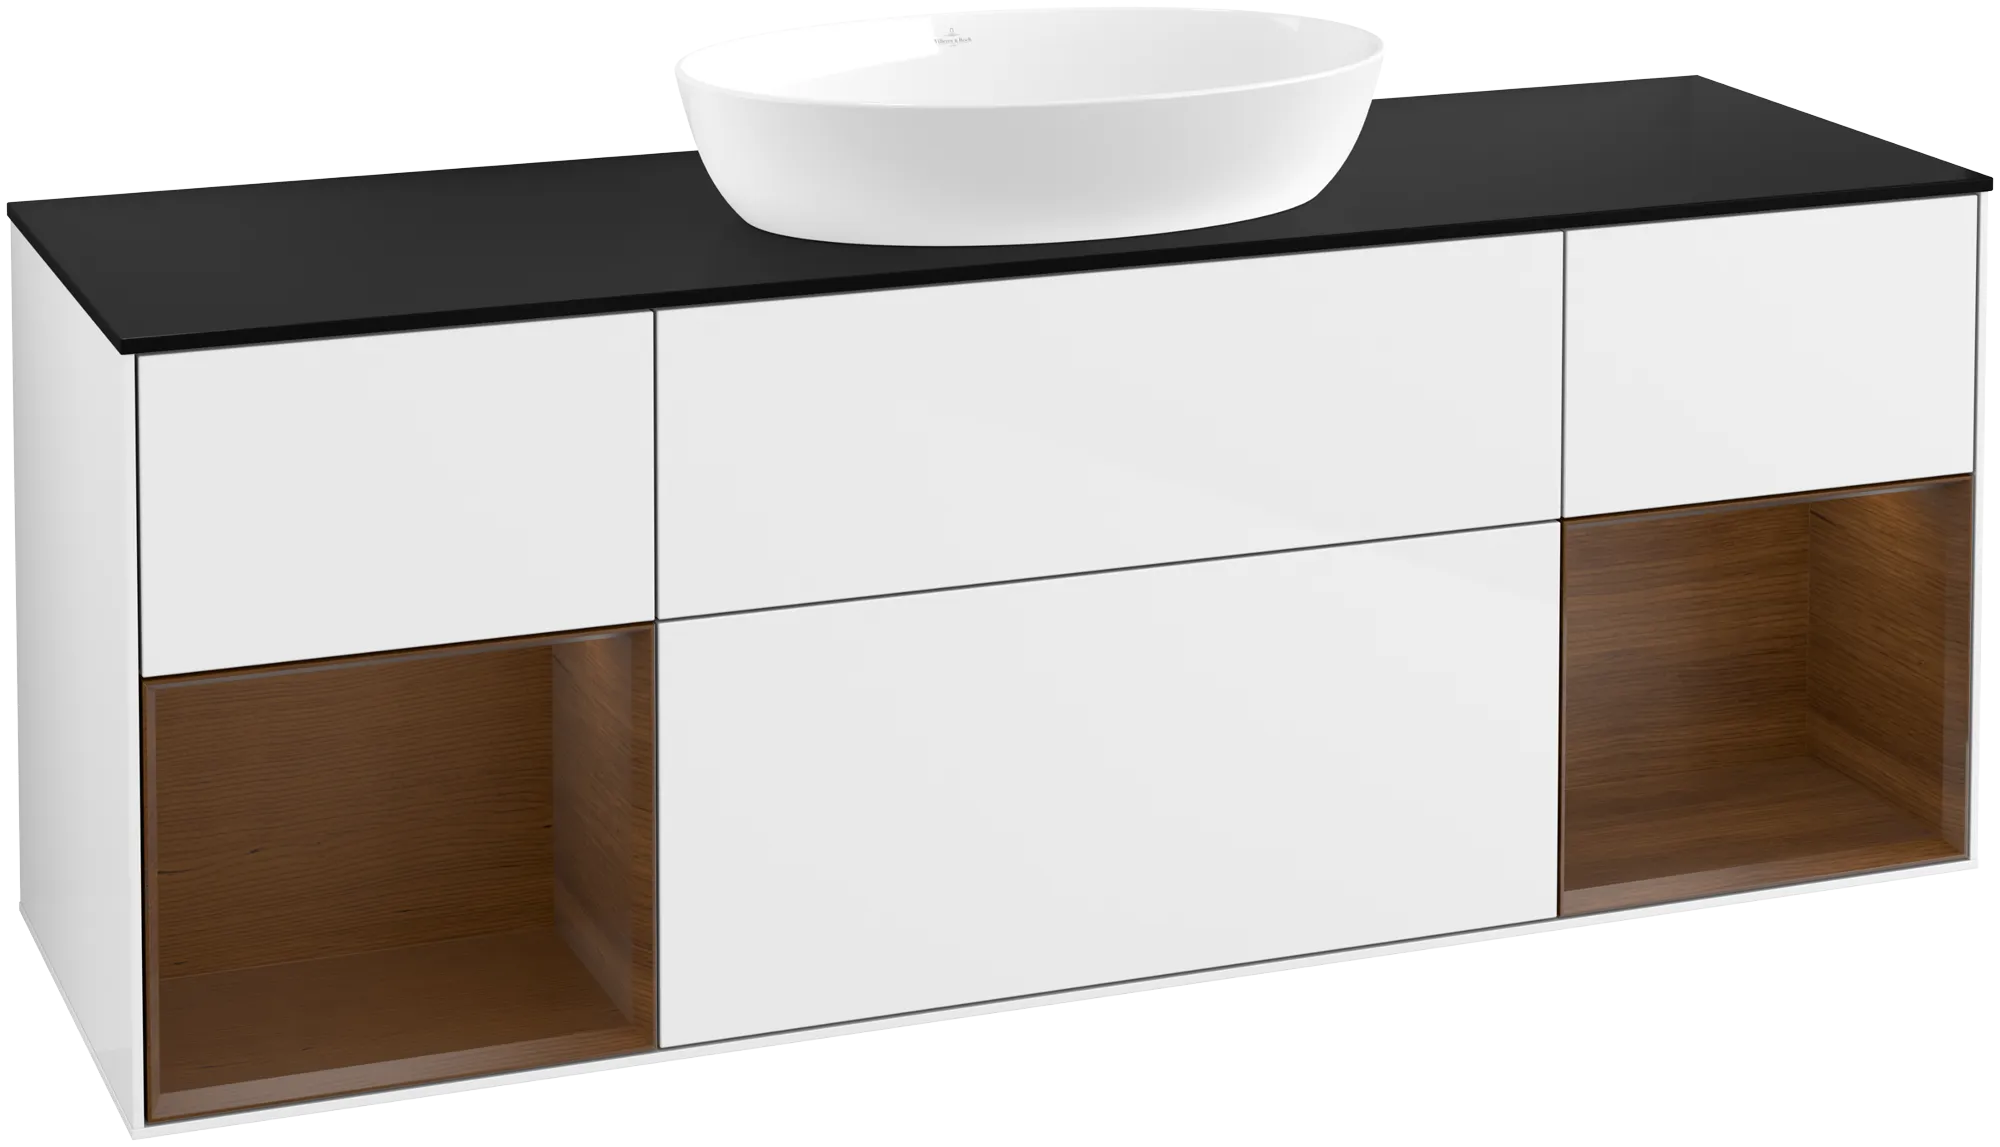 Picture of VILLEROY BOCH Finion Vanity unit, with lighting, 4 pull-out compartments, 1600 x 603 x 501 mm, Glossy White Lacquer / Walnut Veneer / Glass Black Matt #GD02GNGF